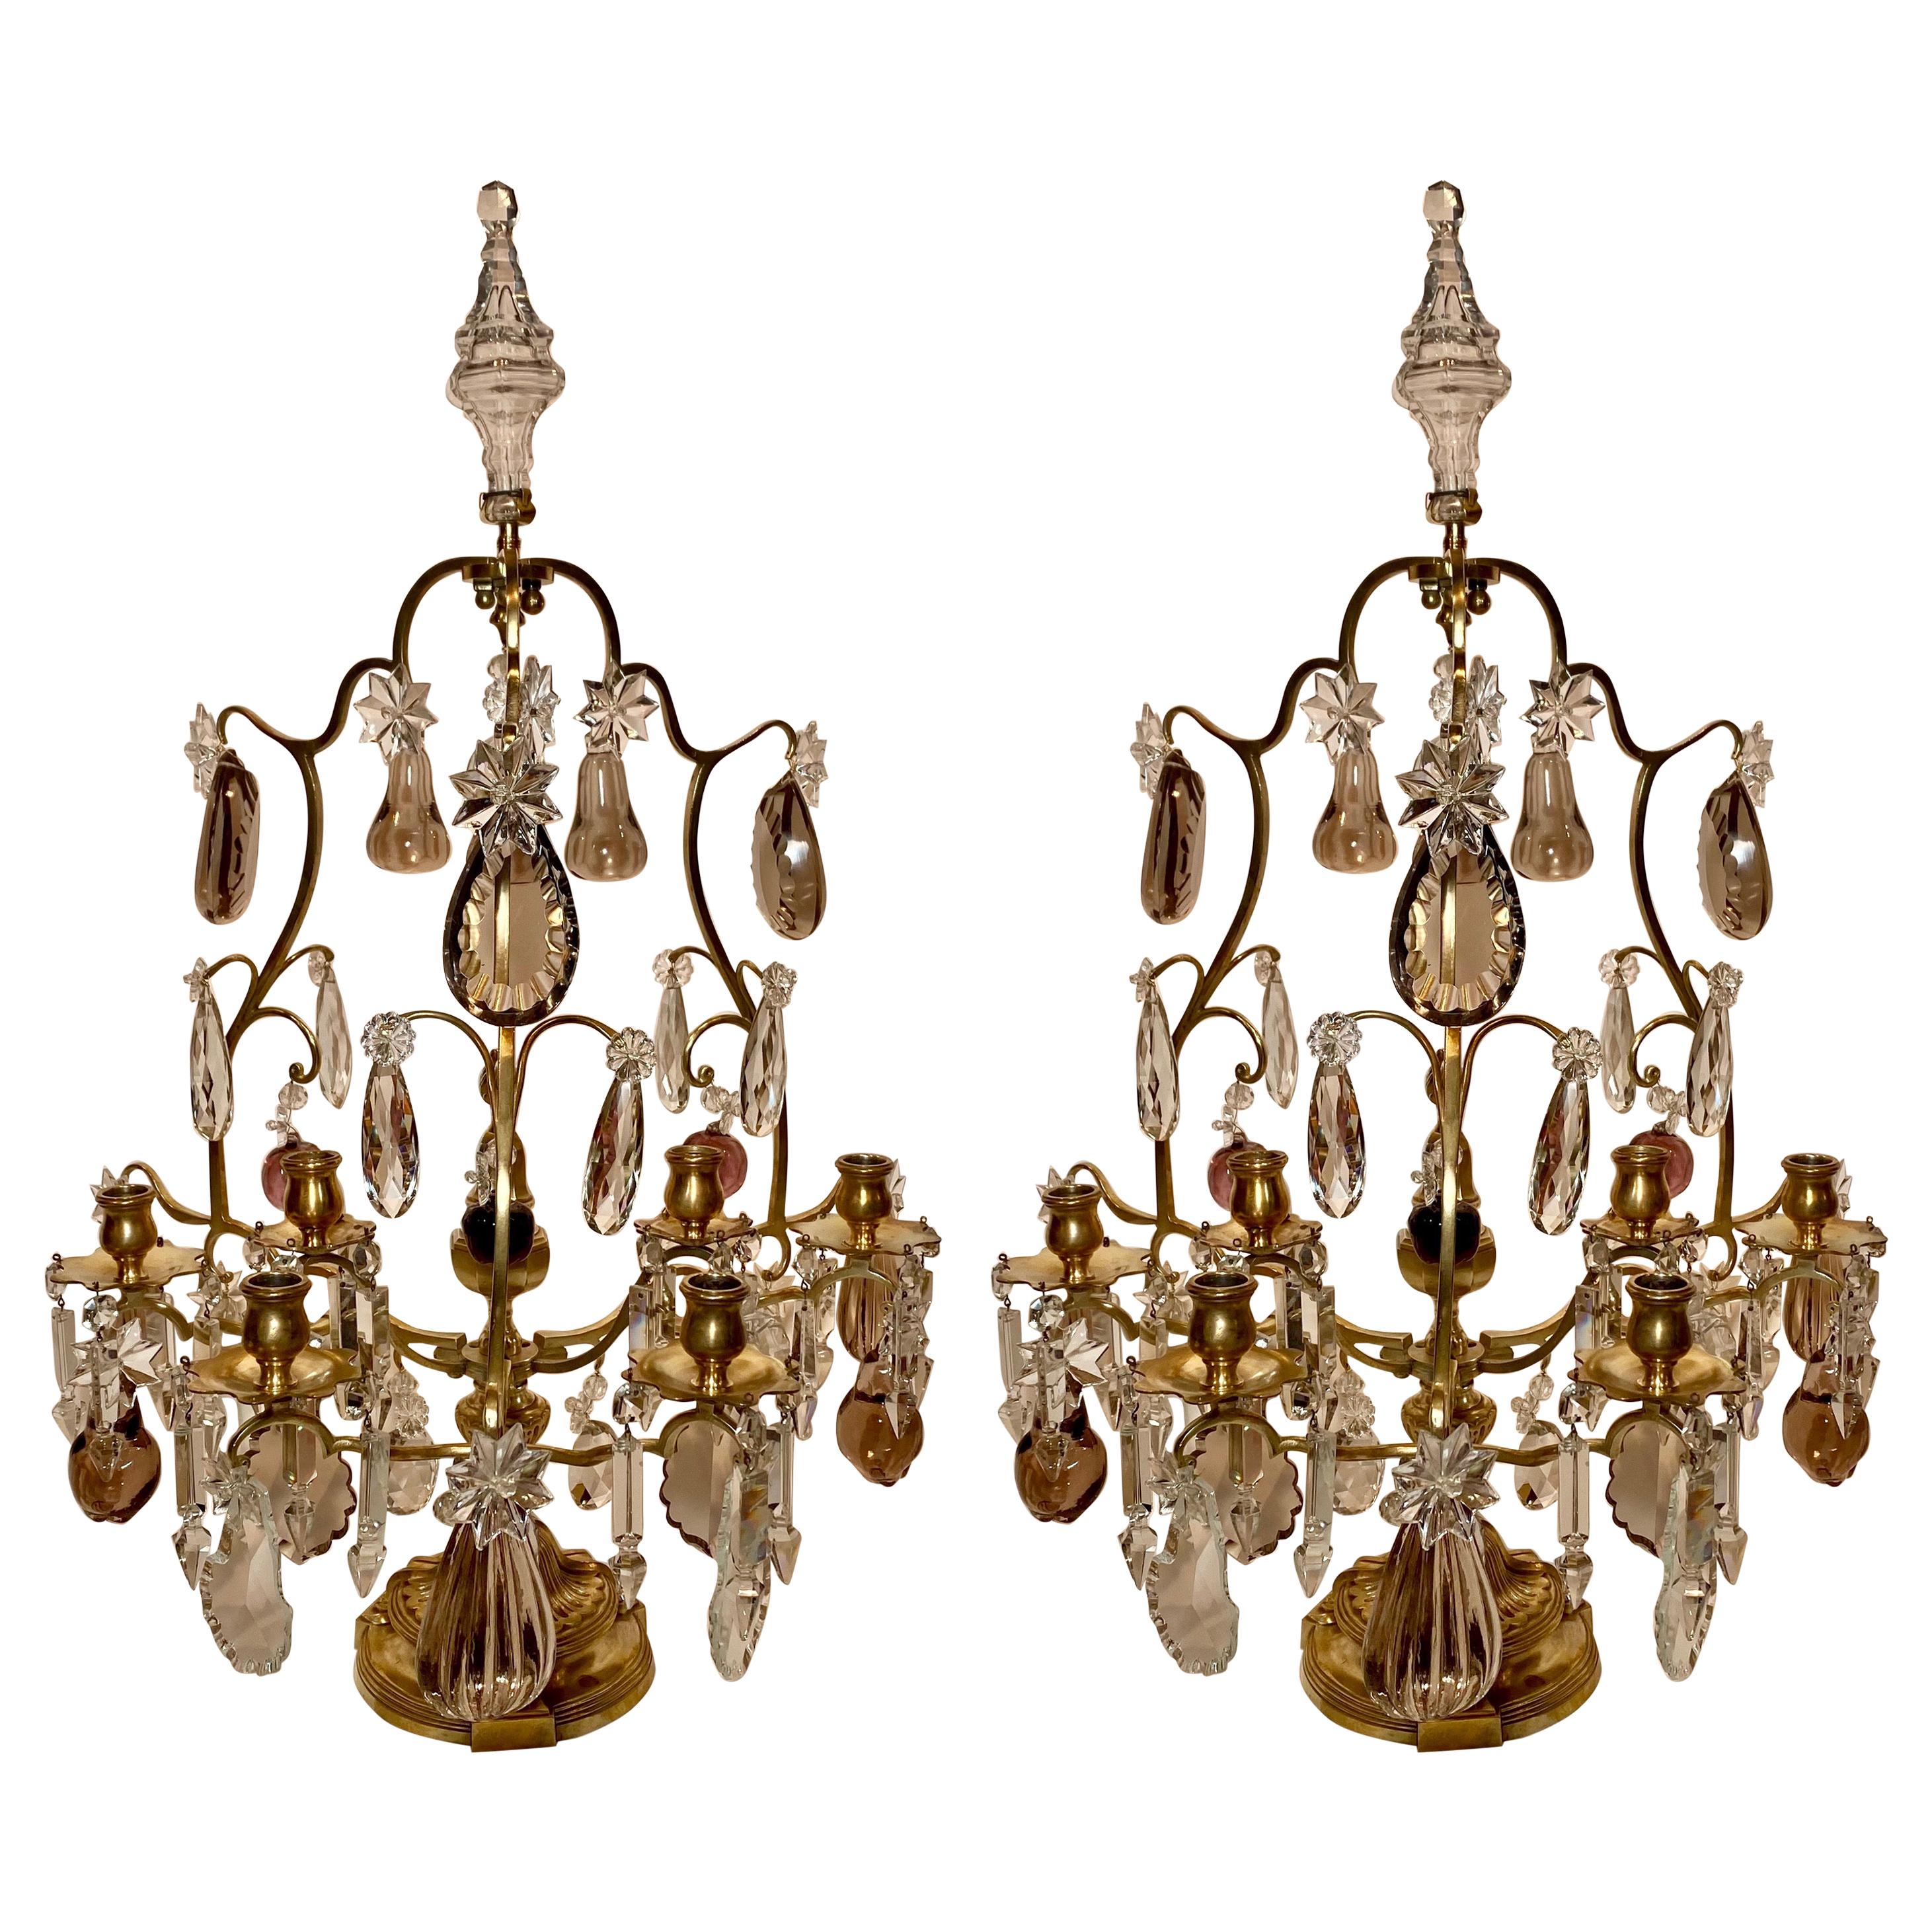 Pair of Antique French Baccarat and Bronze Lyre Girondolles, circa 1875-1885